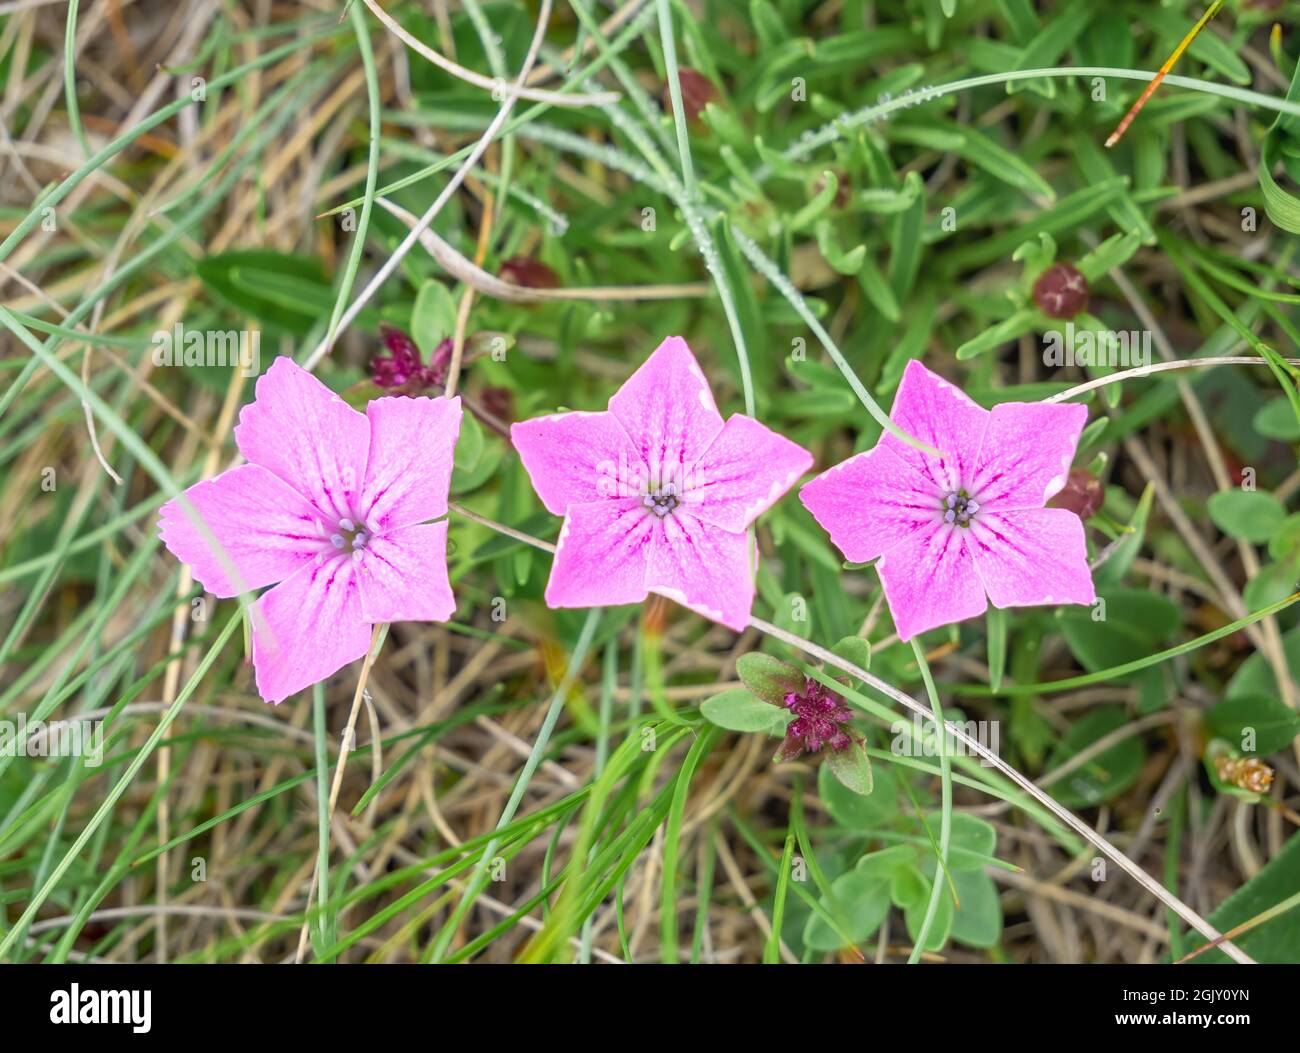 Three pink small flowers Dianthus alpinus, the alpine pink in the Bucegi Mountains, Romania. Pink flowers in the green grass meadow Stock Photo